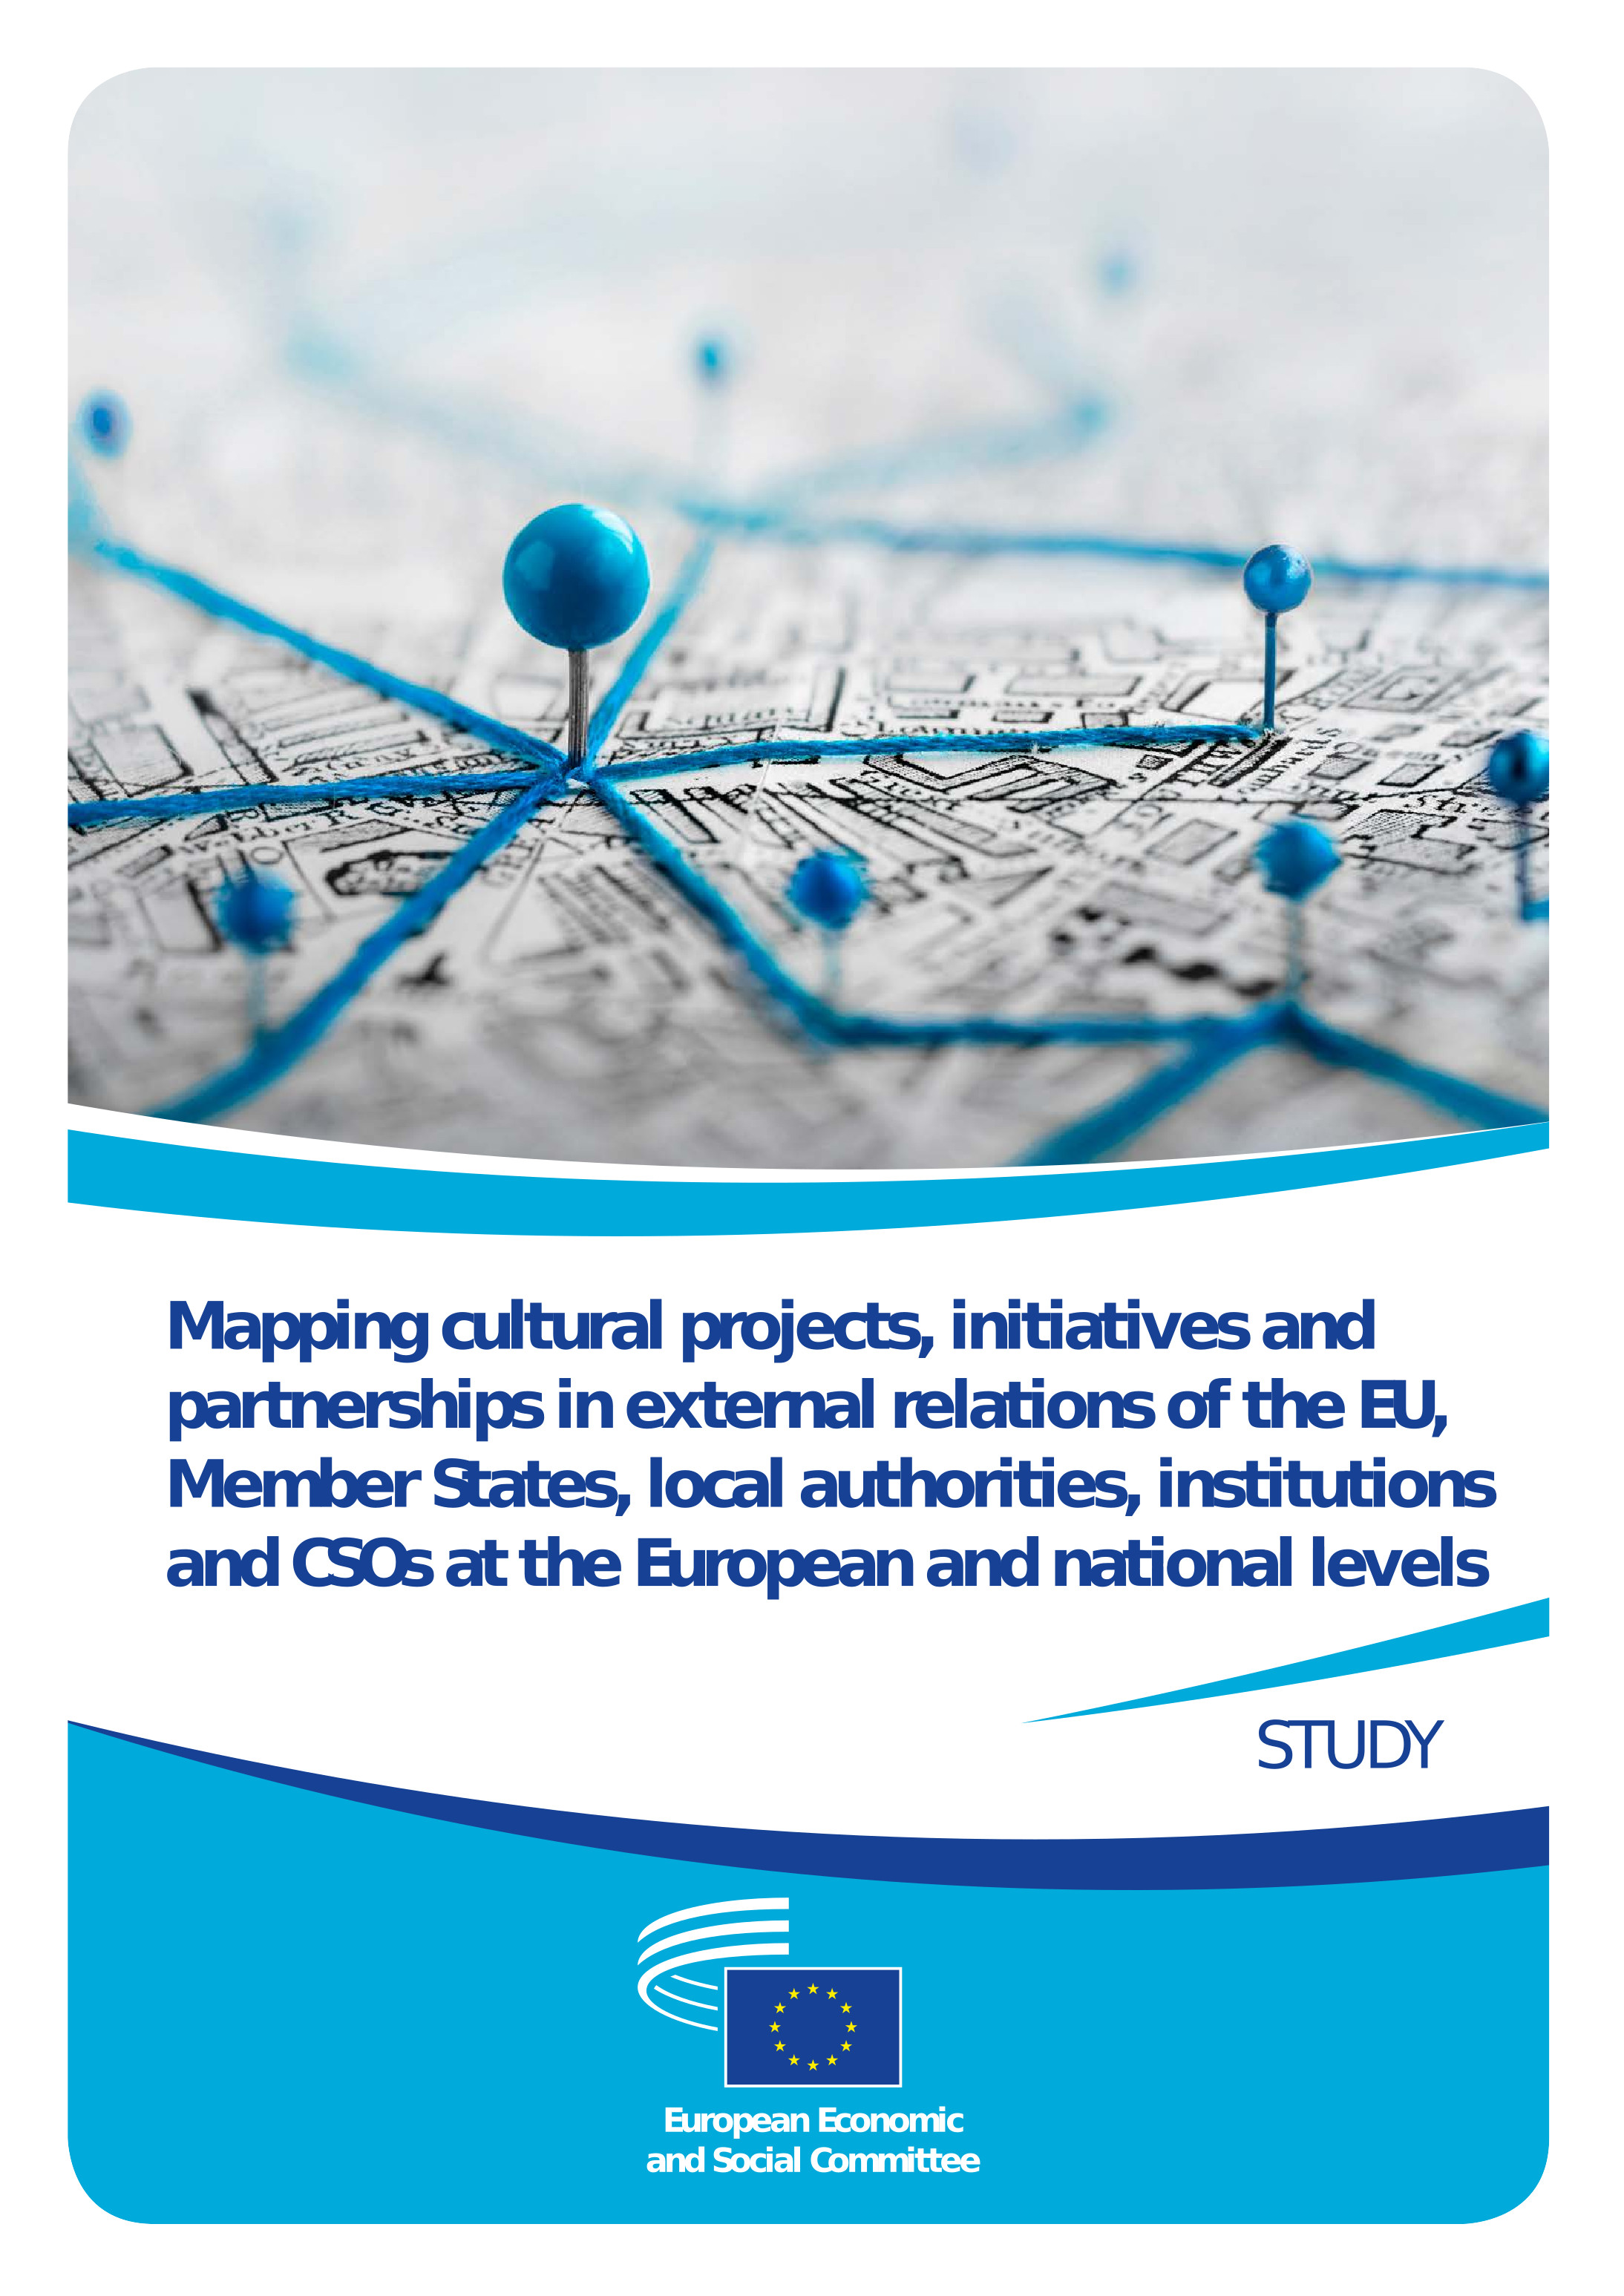 Report on the cultural relations of the EU commissioned by the European Economic and Social Committee has been published